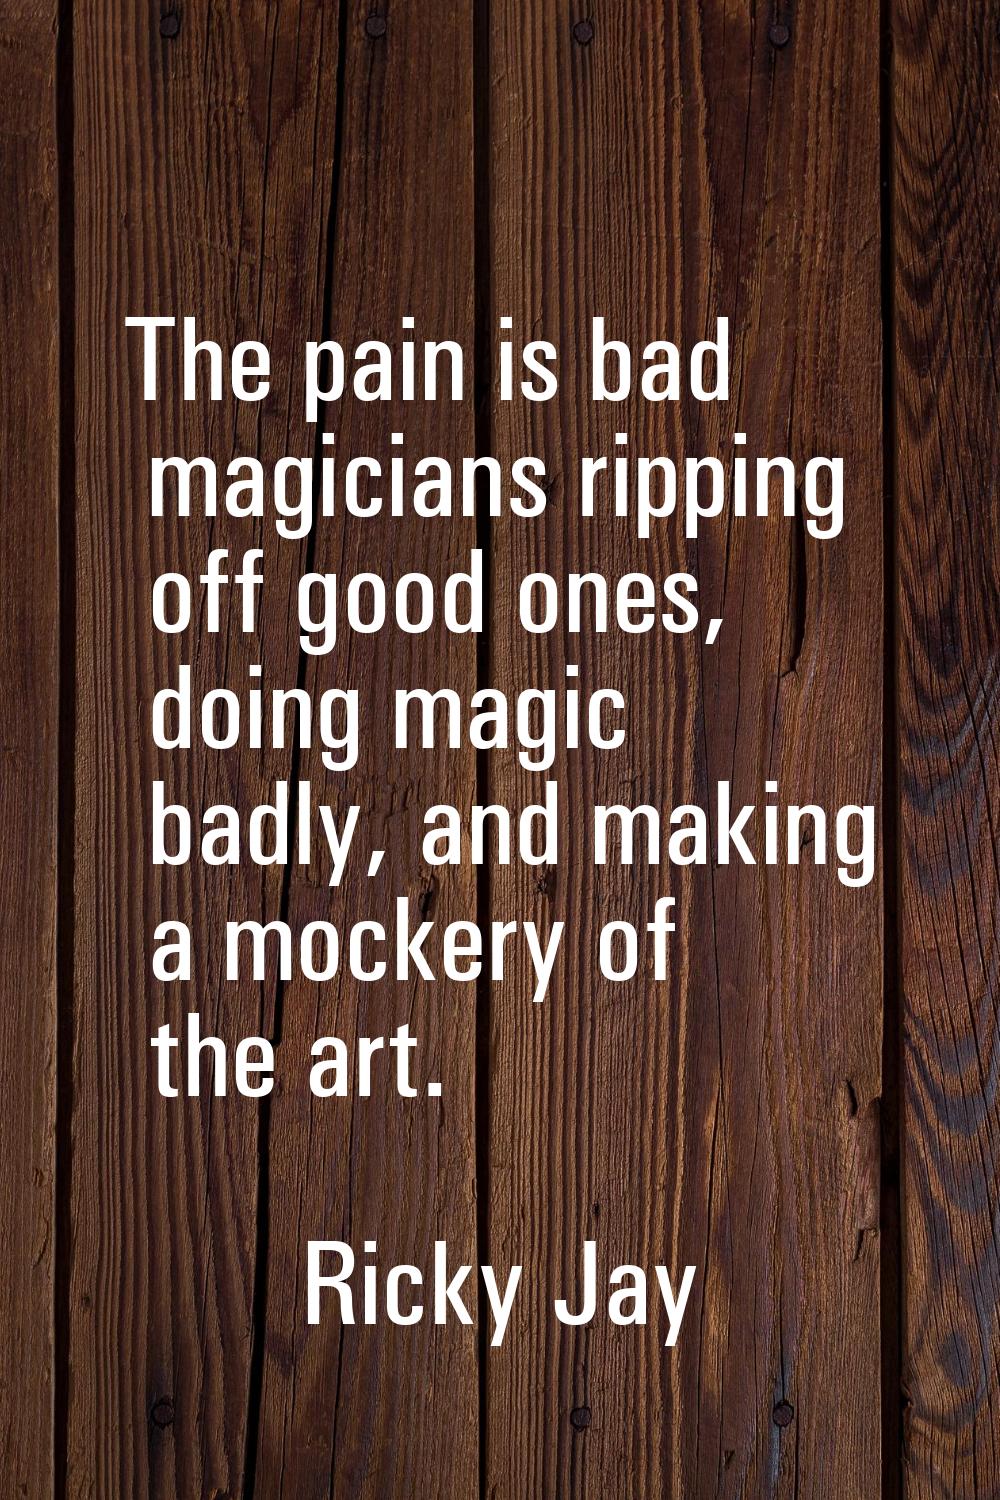 The pain is bad magicians ripping off good ones, doing magic badly, and making a mockery of the art